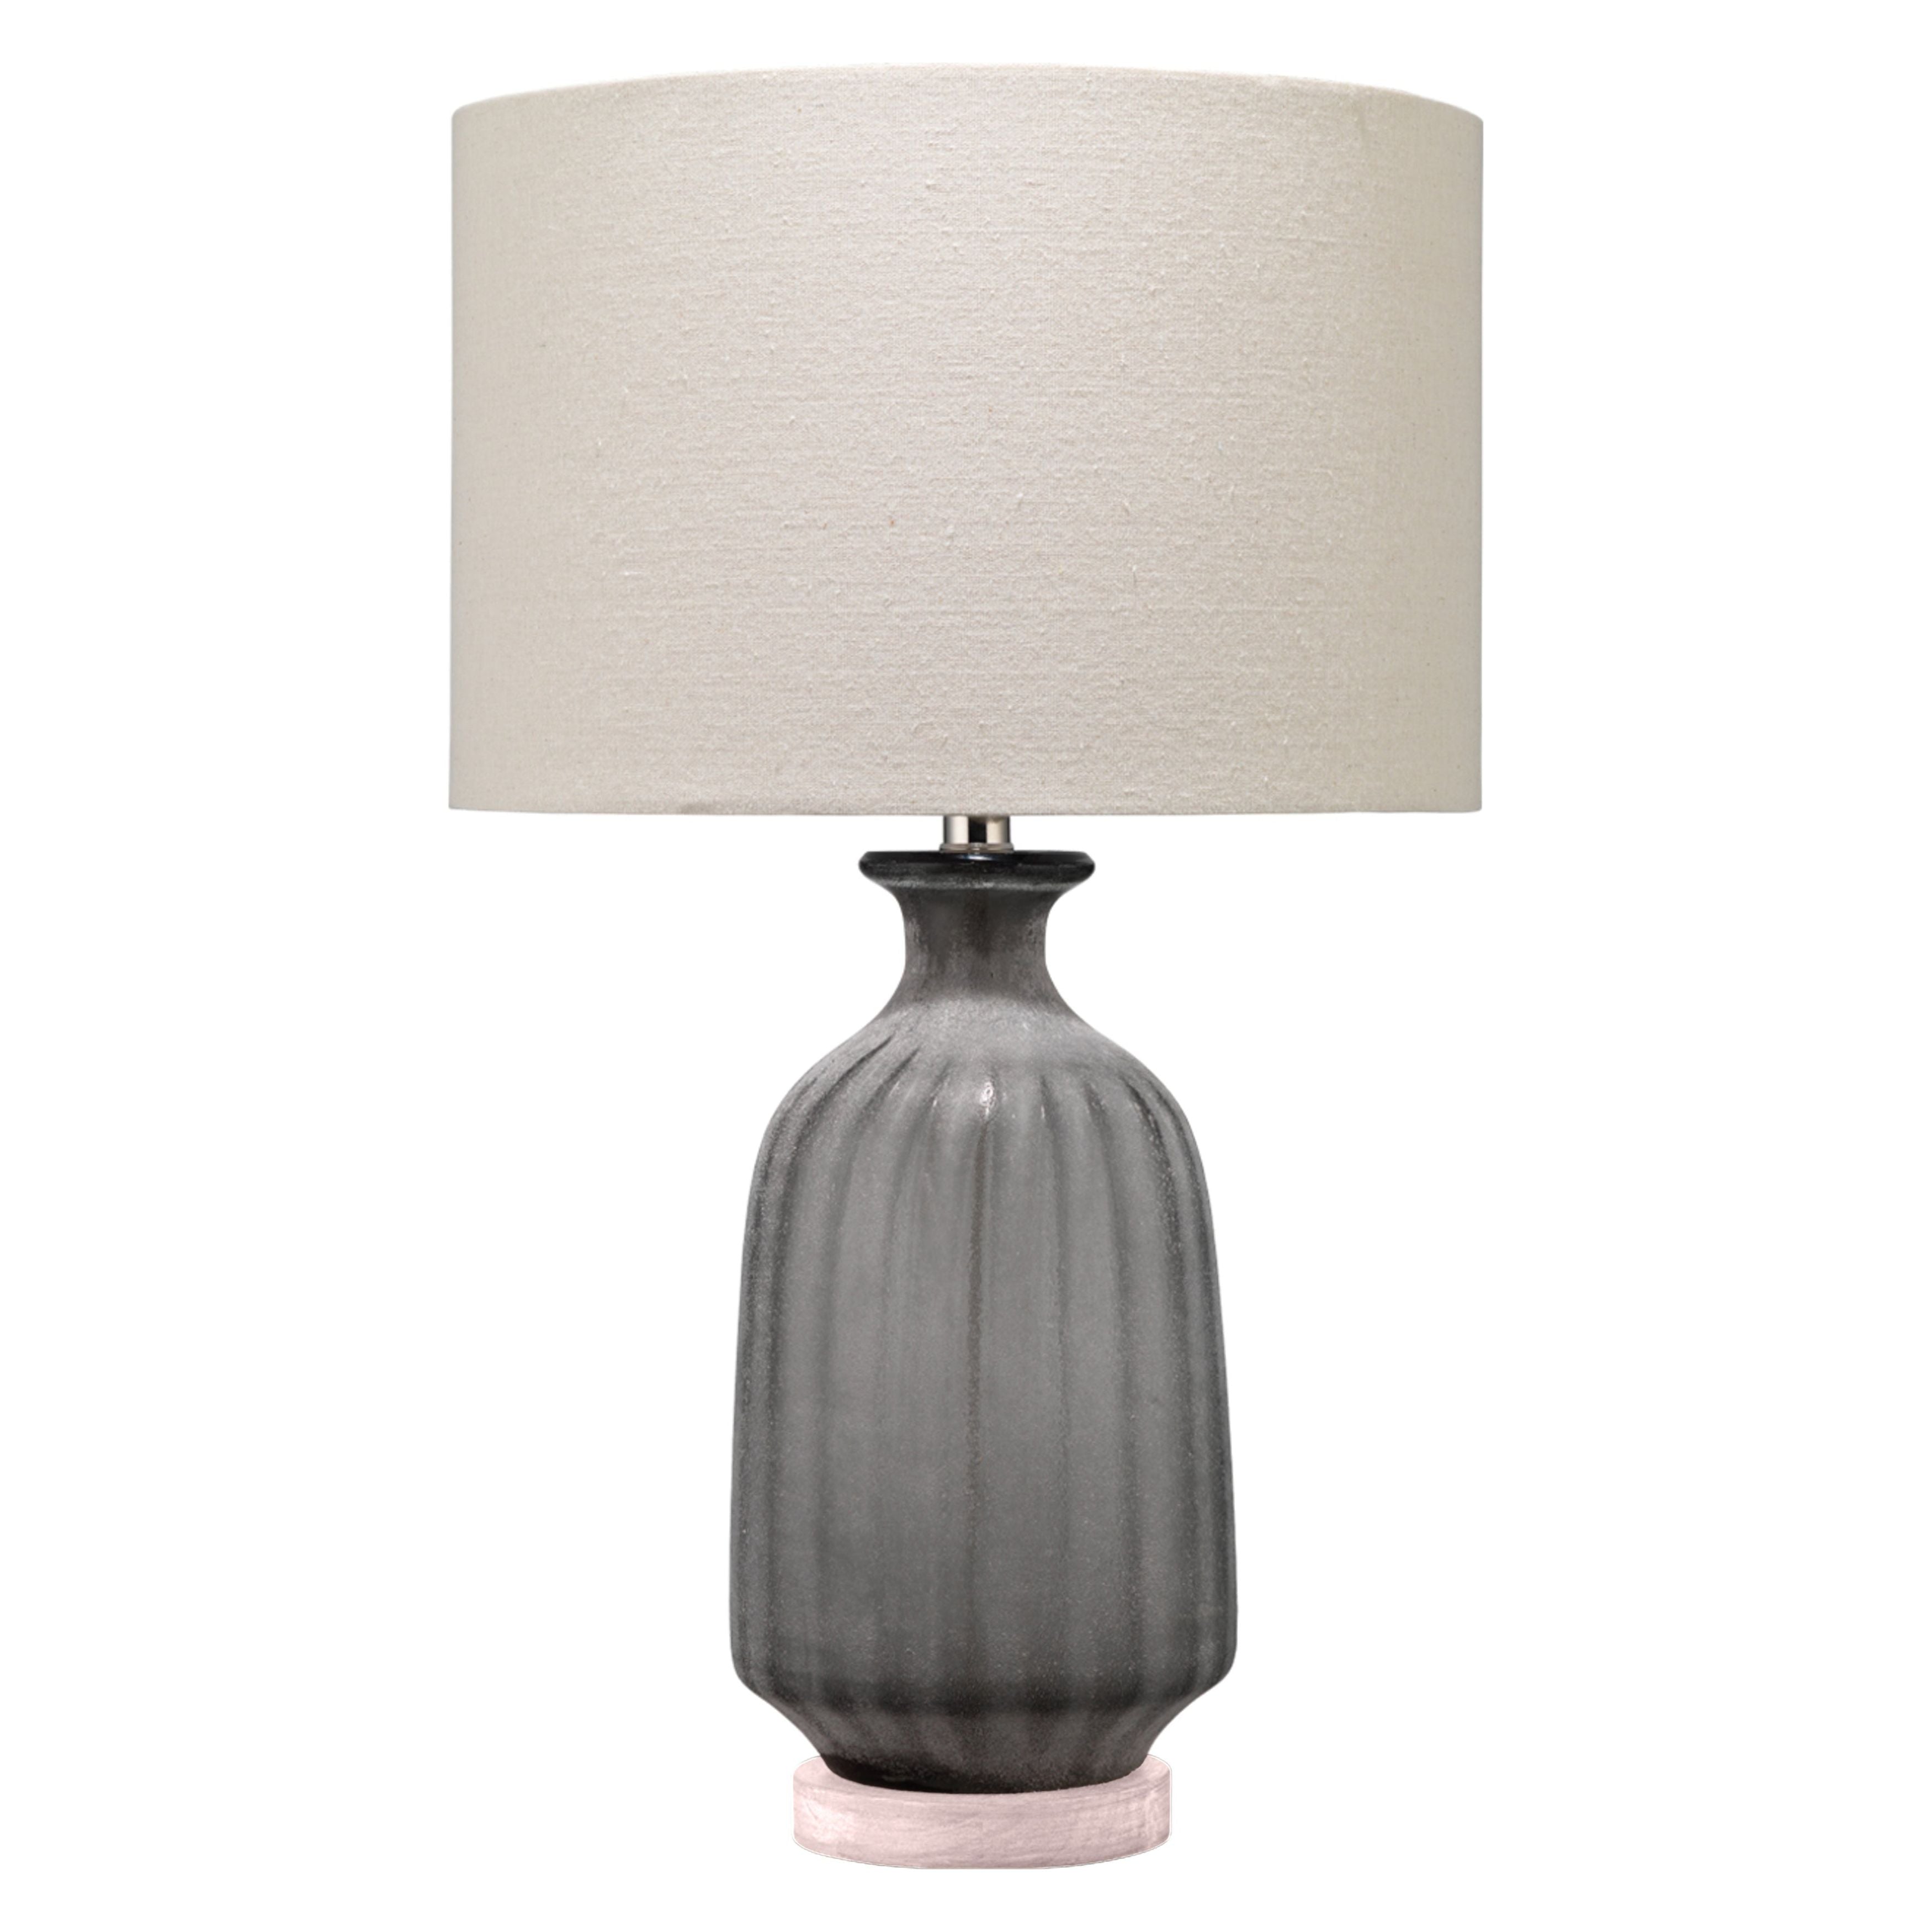 Jamie Young Company - BL616-TL41 - Grey Frosted Glass Table Lamp - Frosted - Grey